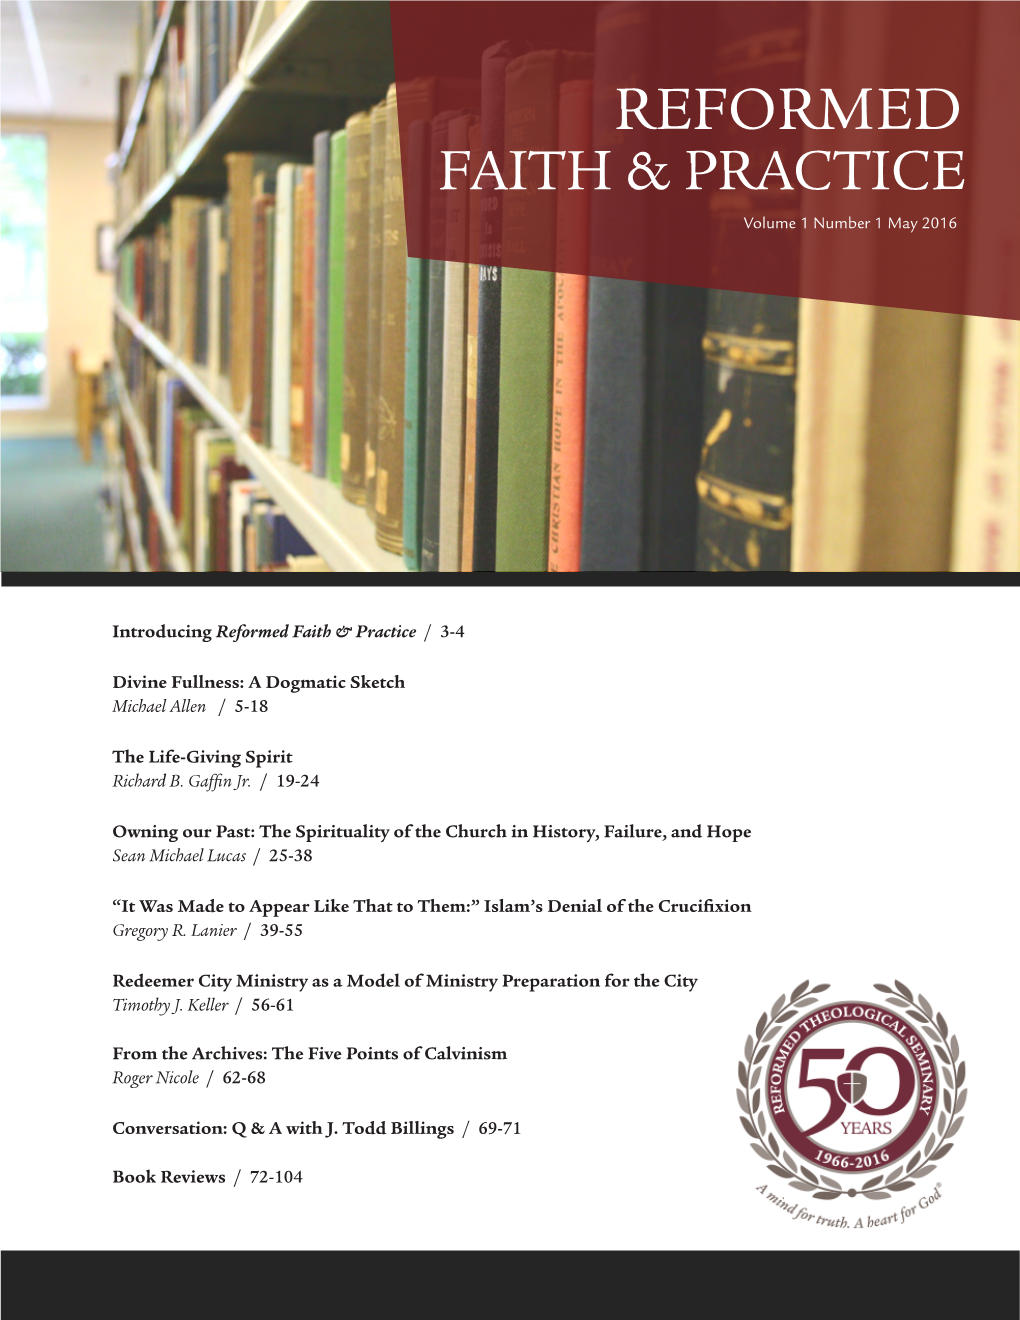 Pdf; and Its Declaration of Conscience on Homosexuality (1992): (Accessed 17 June 2015)